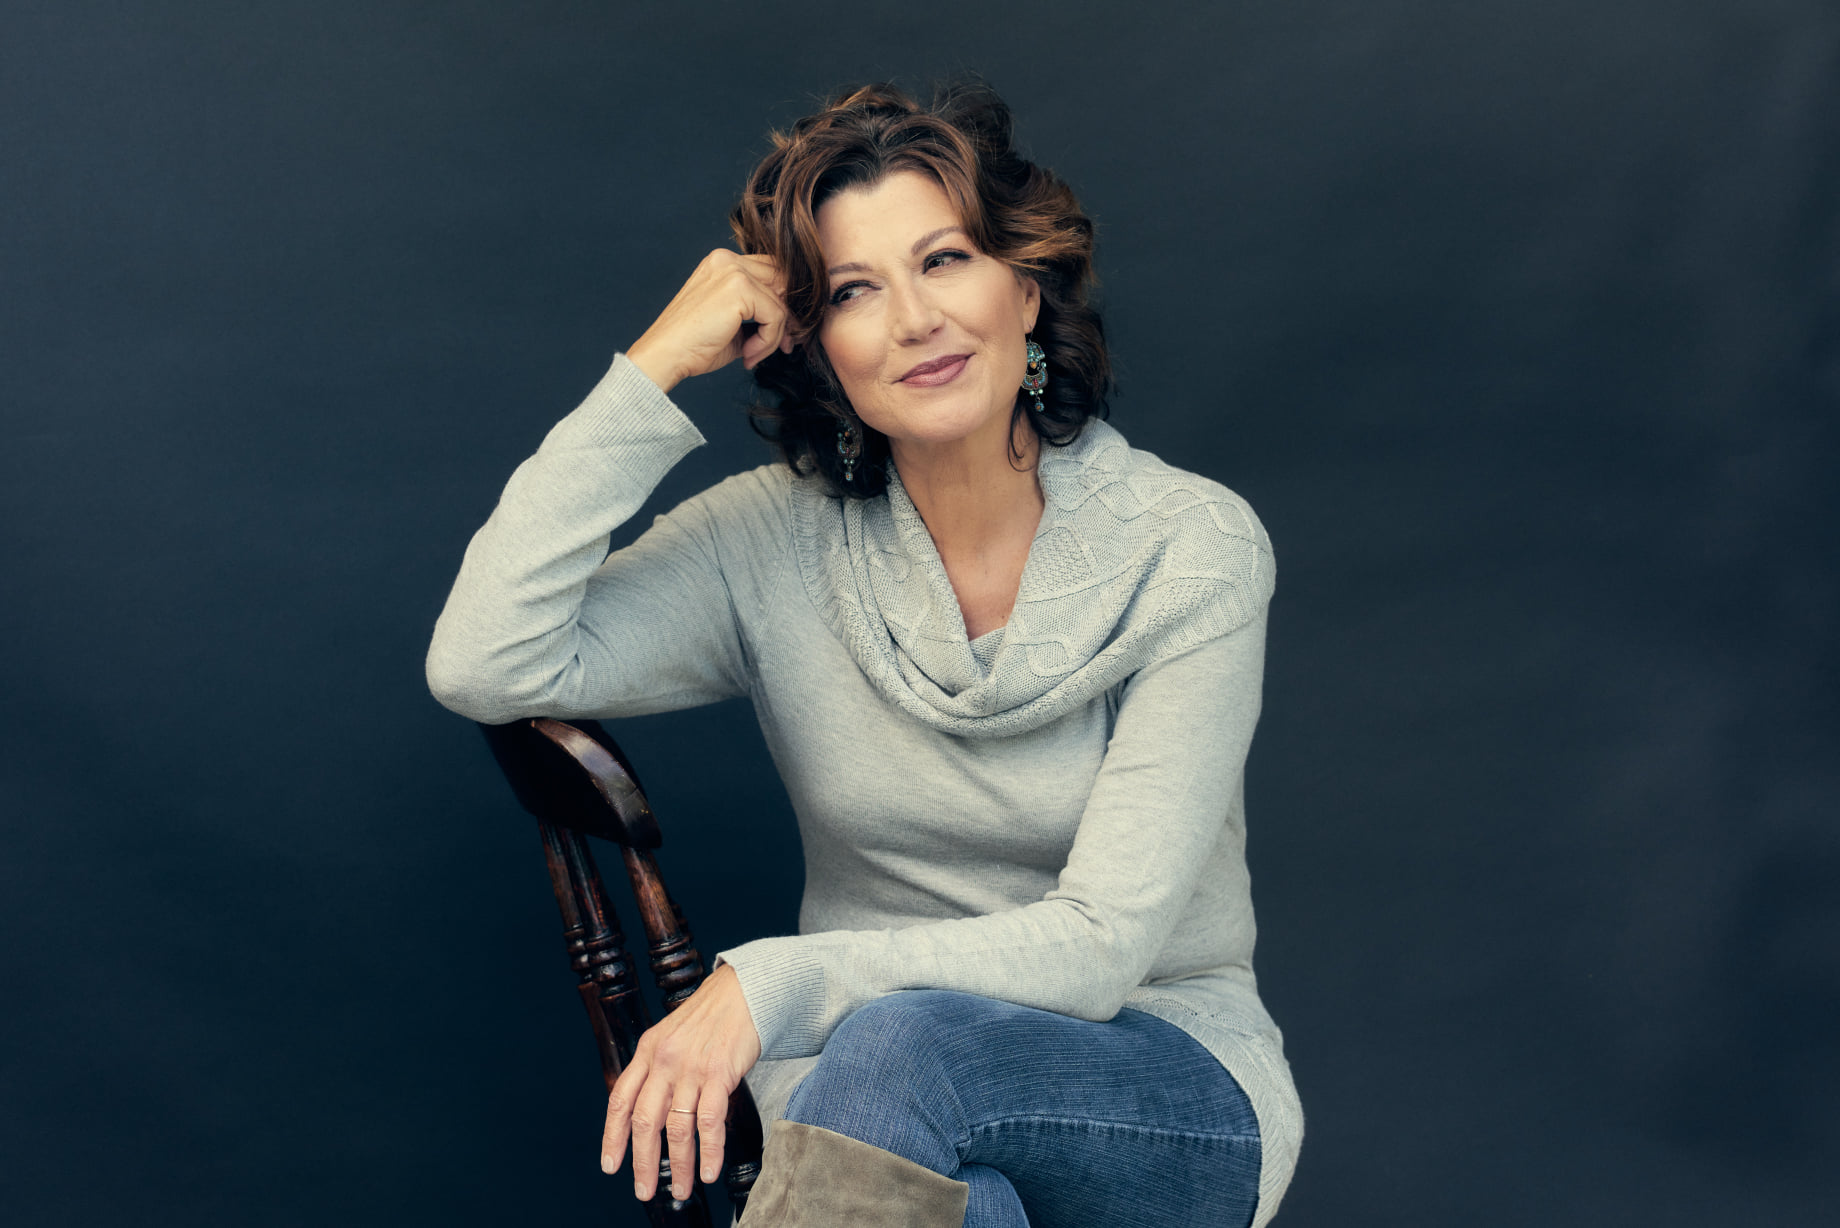 Amy Grant Hospitalized But In 'Stable Condition' After Bike Crash